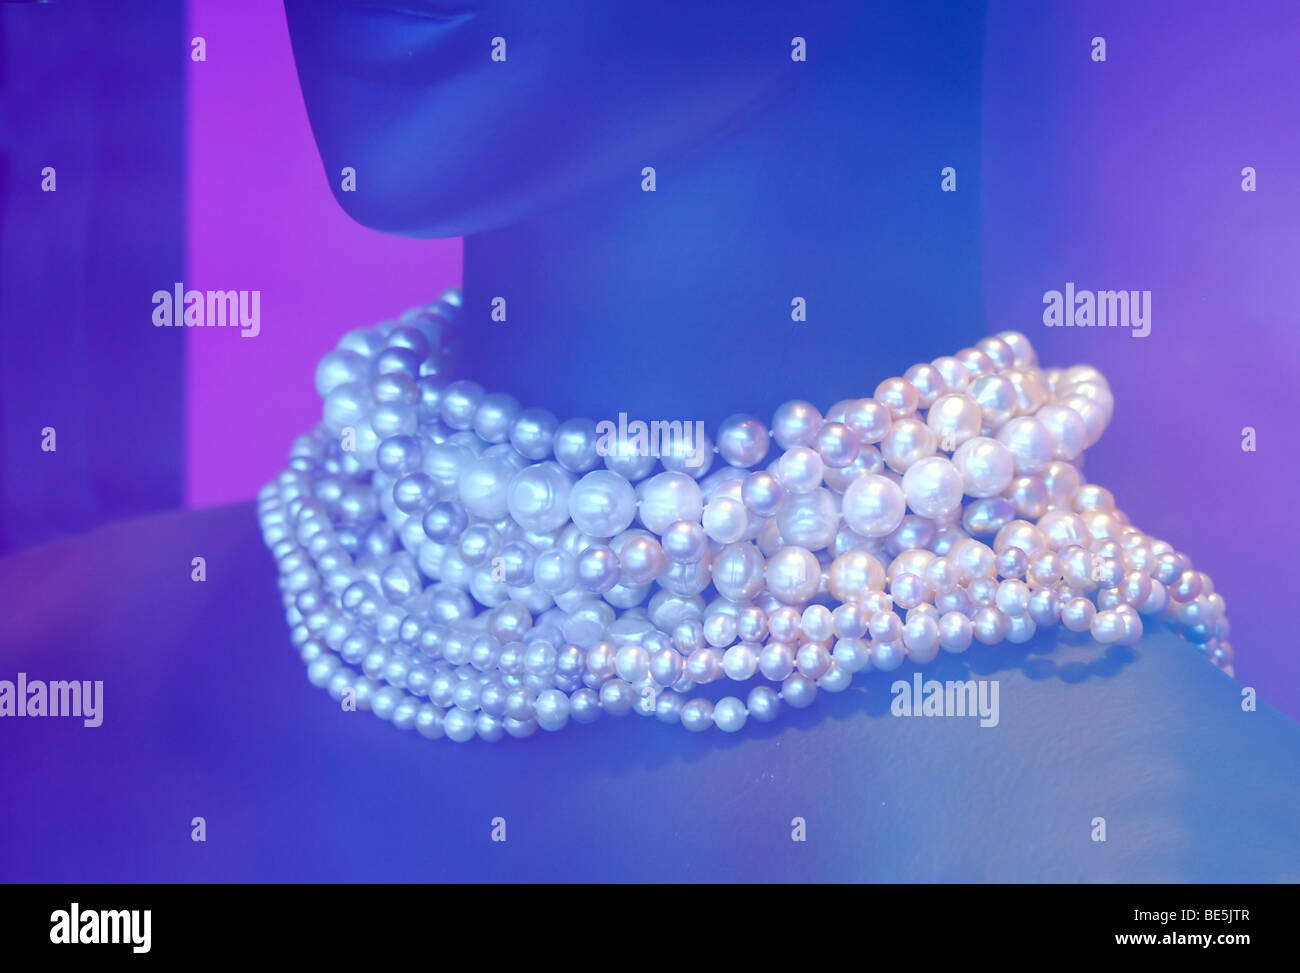 Pearl necklaces Stock Photo